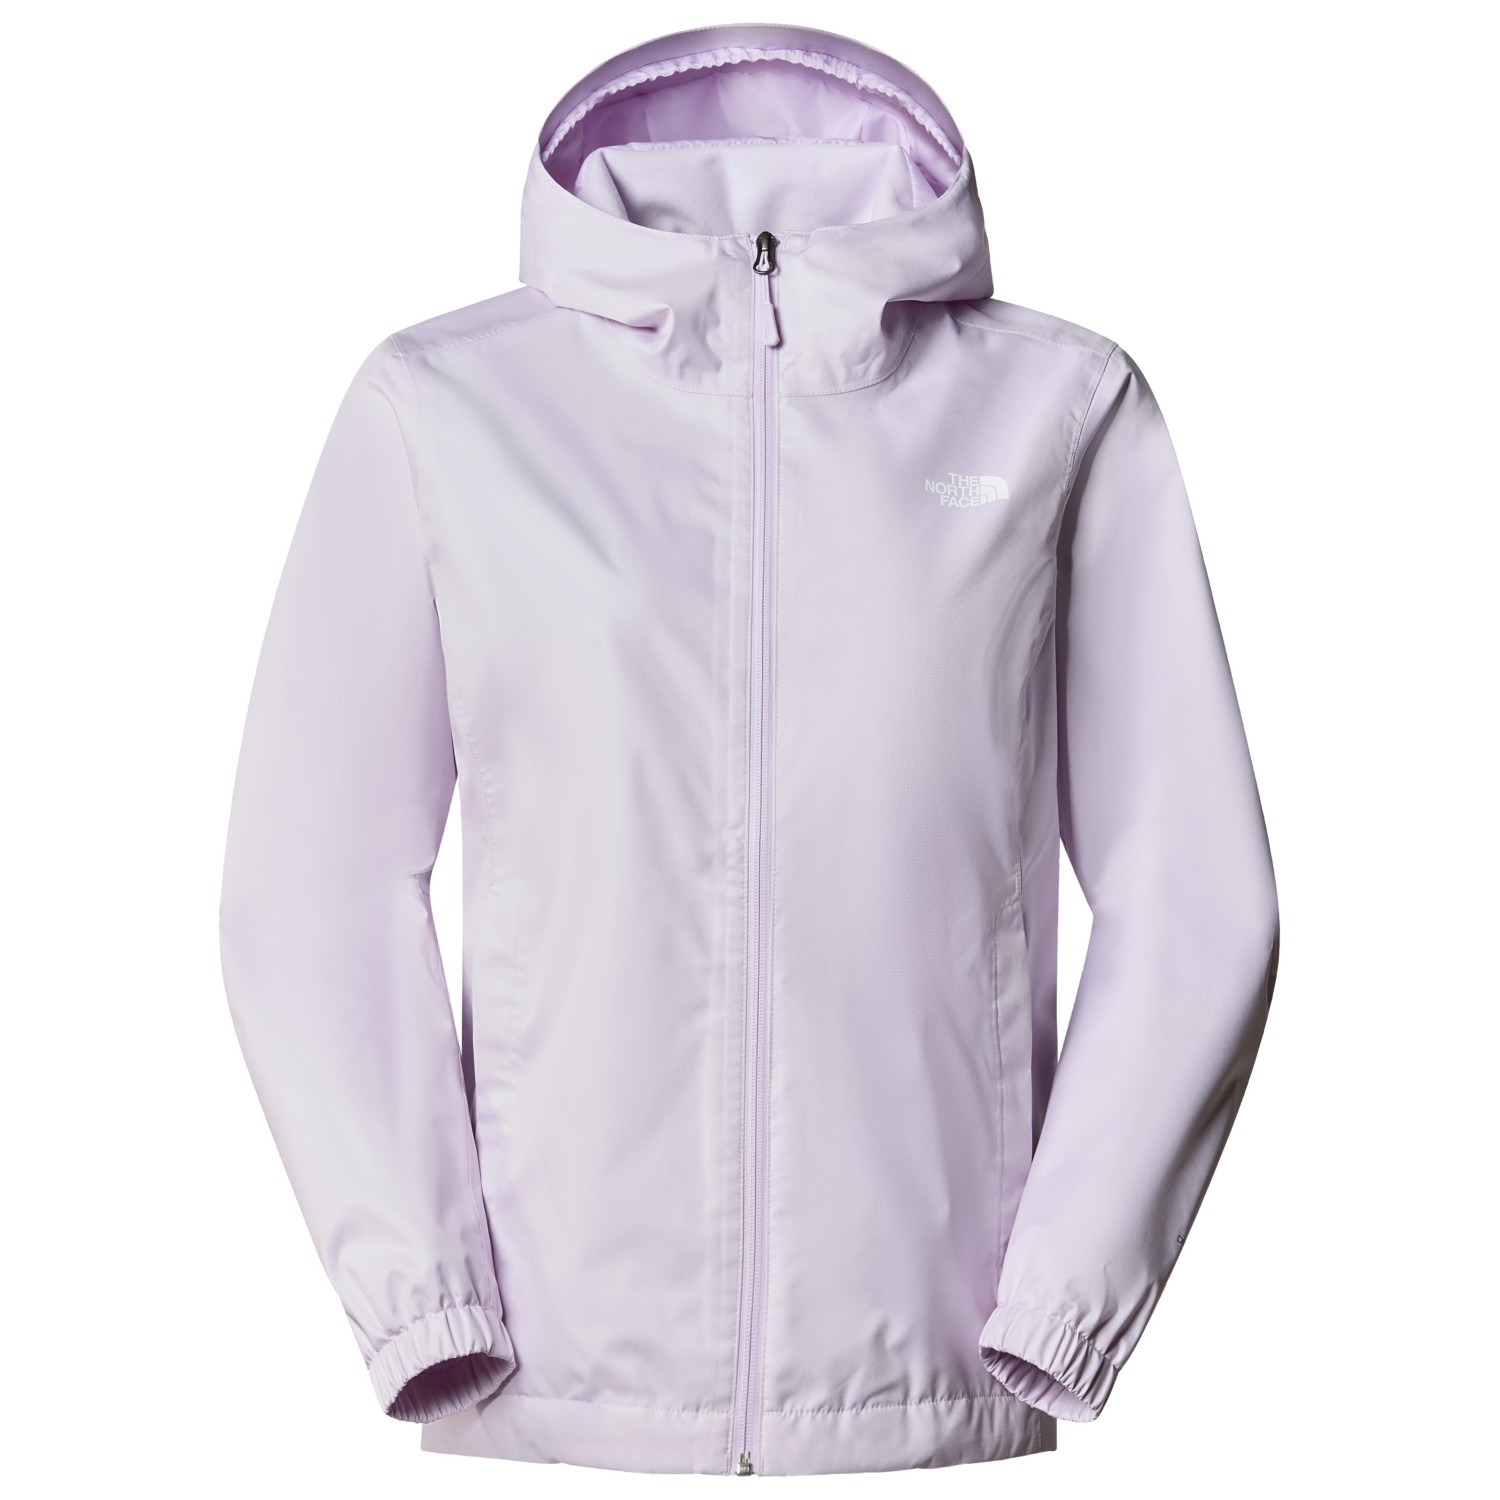 Дождевик The North Face Women's Quest, цвет Icy Lilac